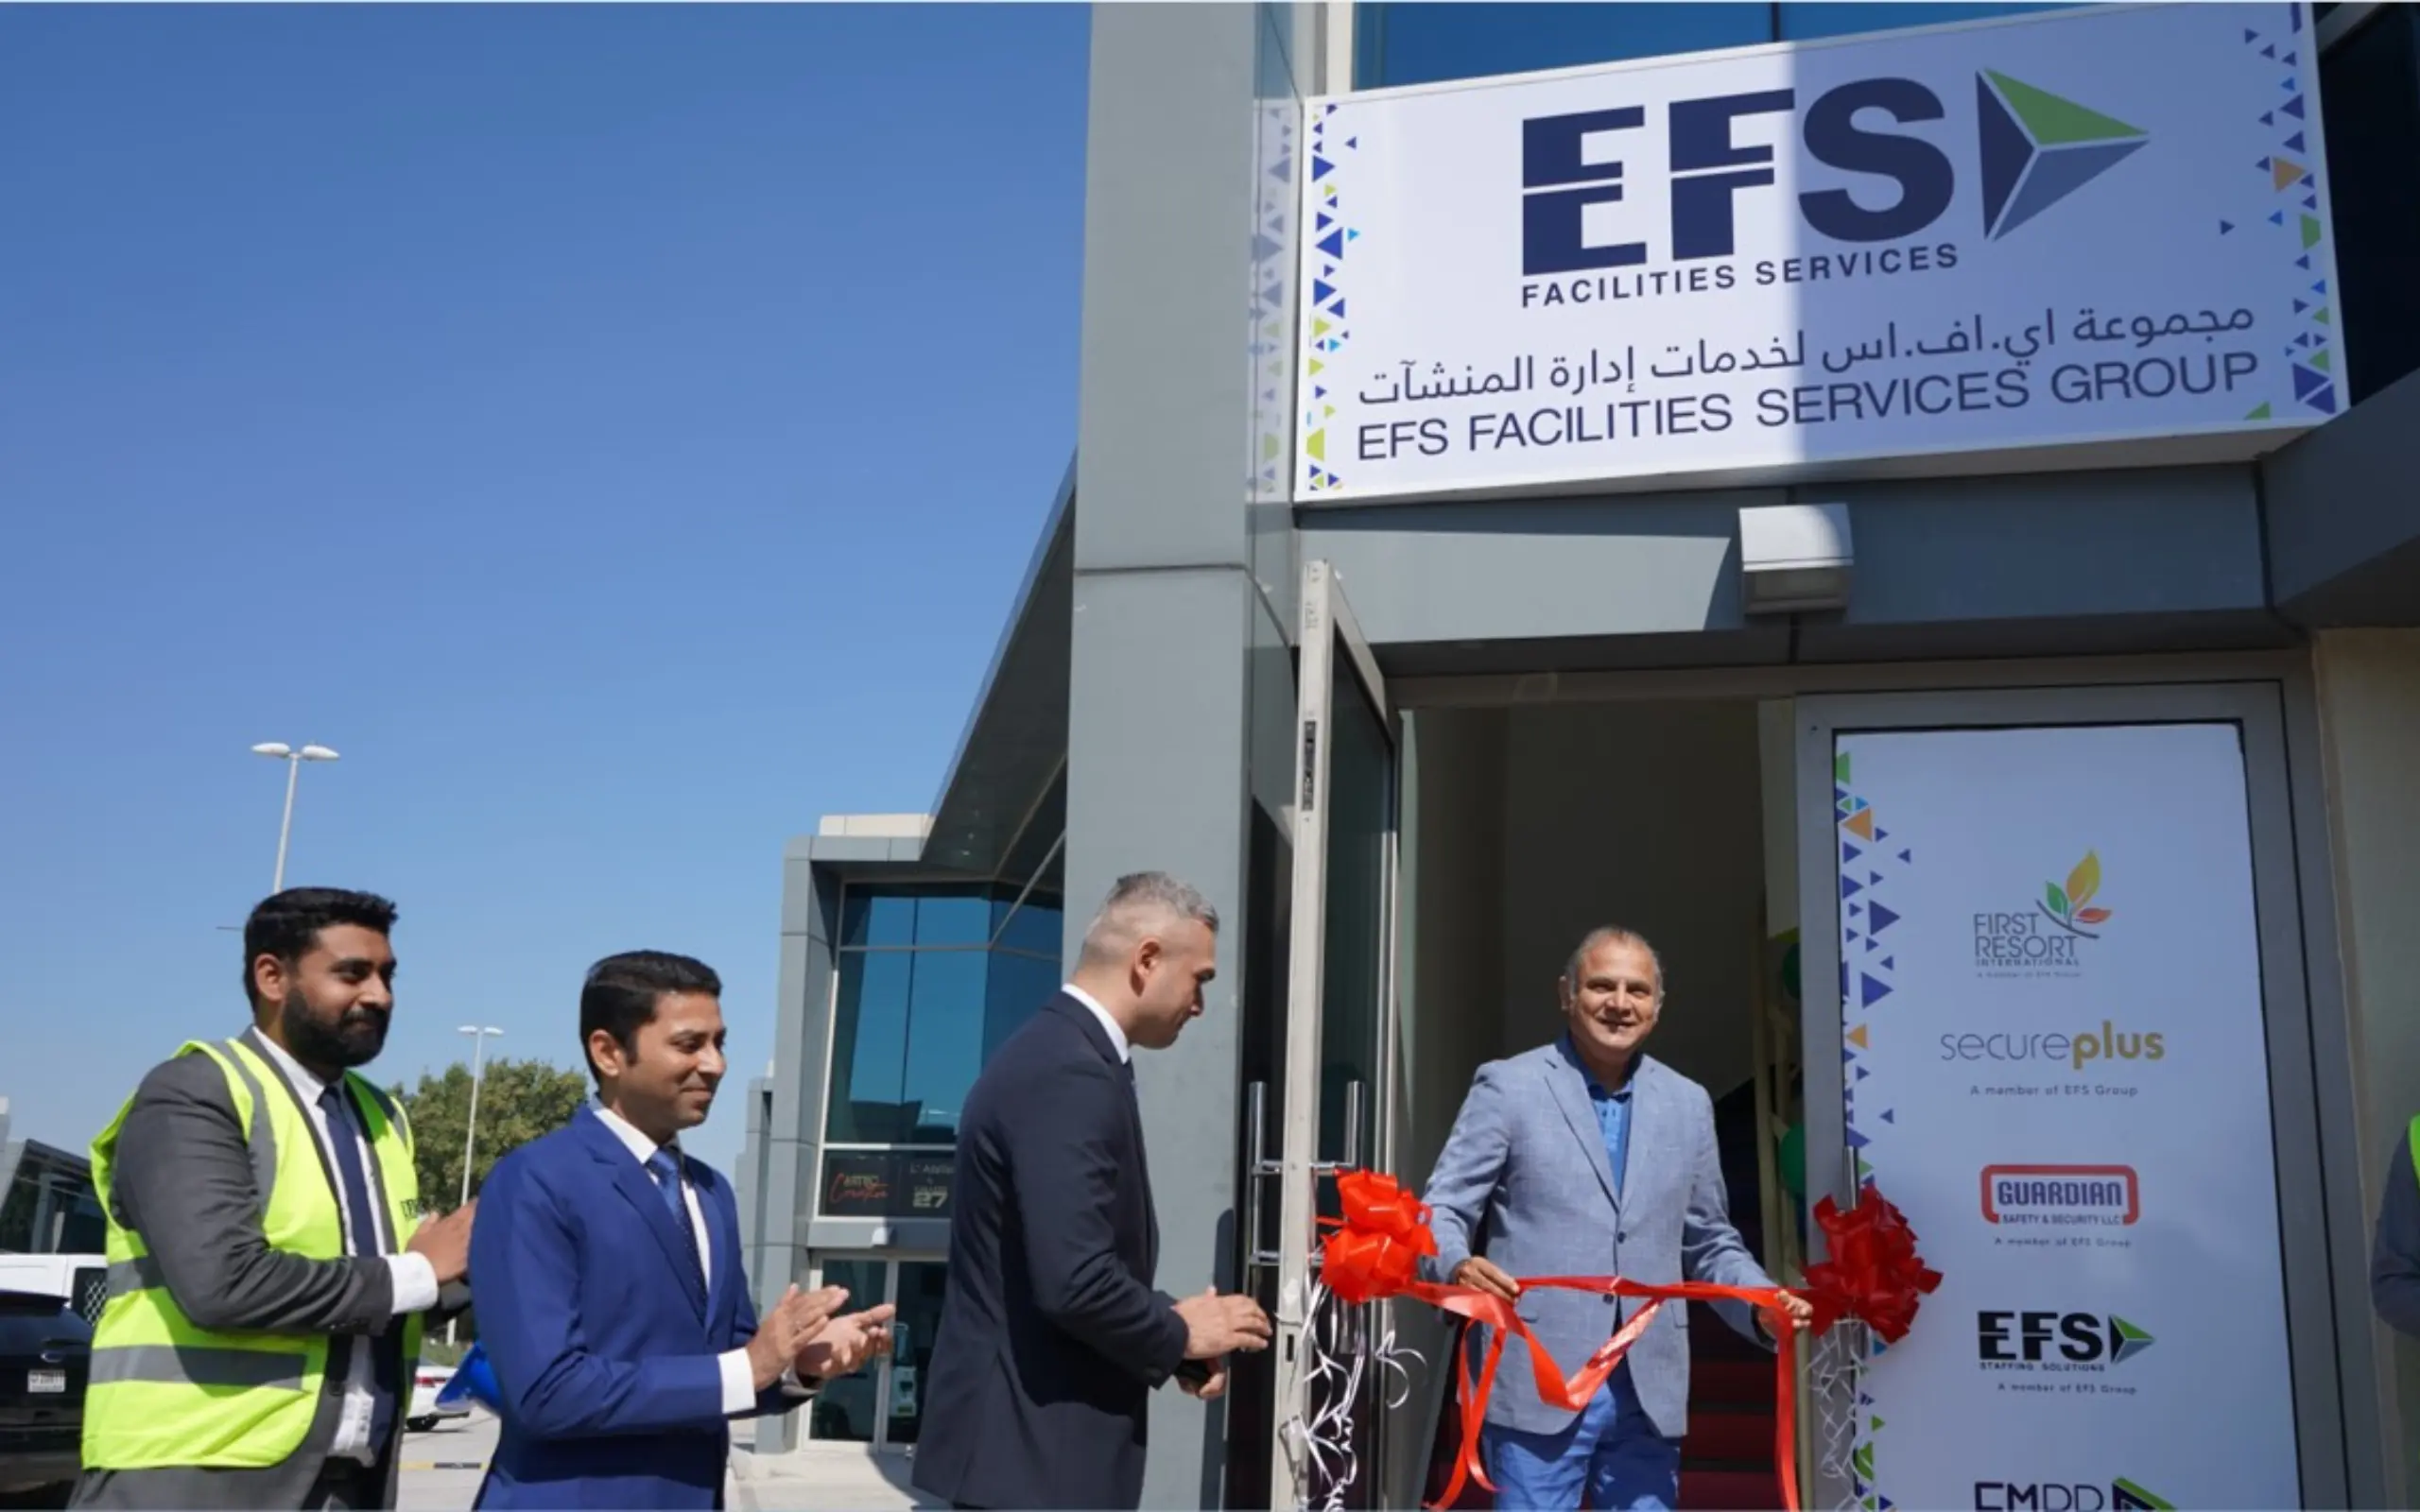 EFS-facilities-services-group-inaugurates-a-state-of-the-art-centralized-store